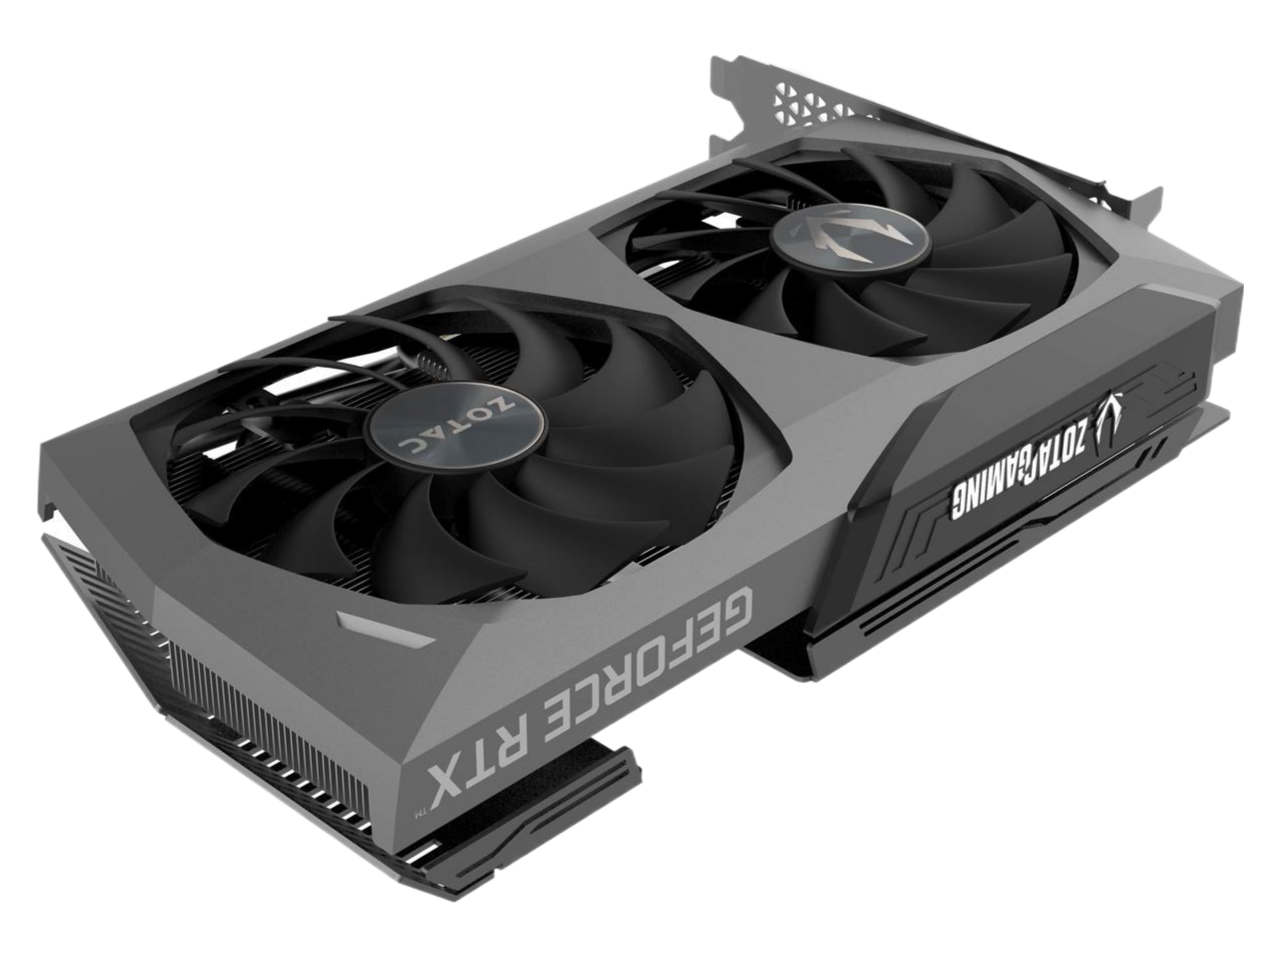 ZOTAC GAMING GeForce RTX 3070 Twin Edge OC 8GB GDDR6 256-bit 14 Gbps PCIE 4.0 Gaming IceStorm 2.0 Advanced Cooling White LED Logo Lighting Graphics Card ZT-A30700H-10P